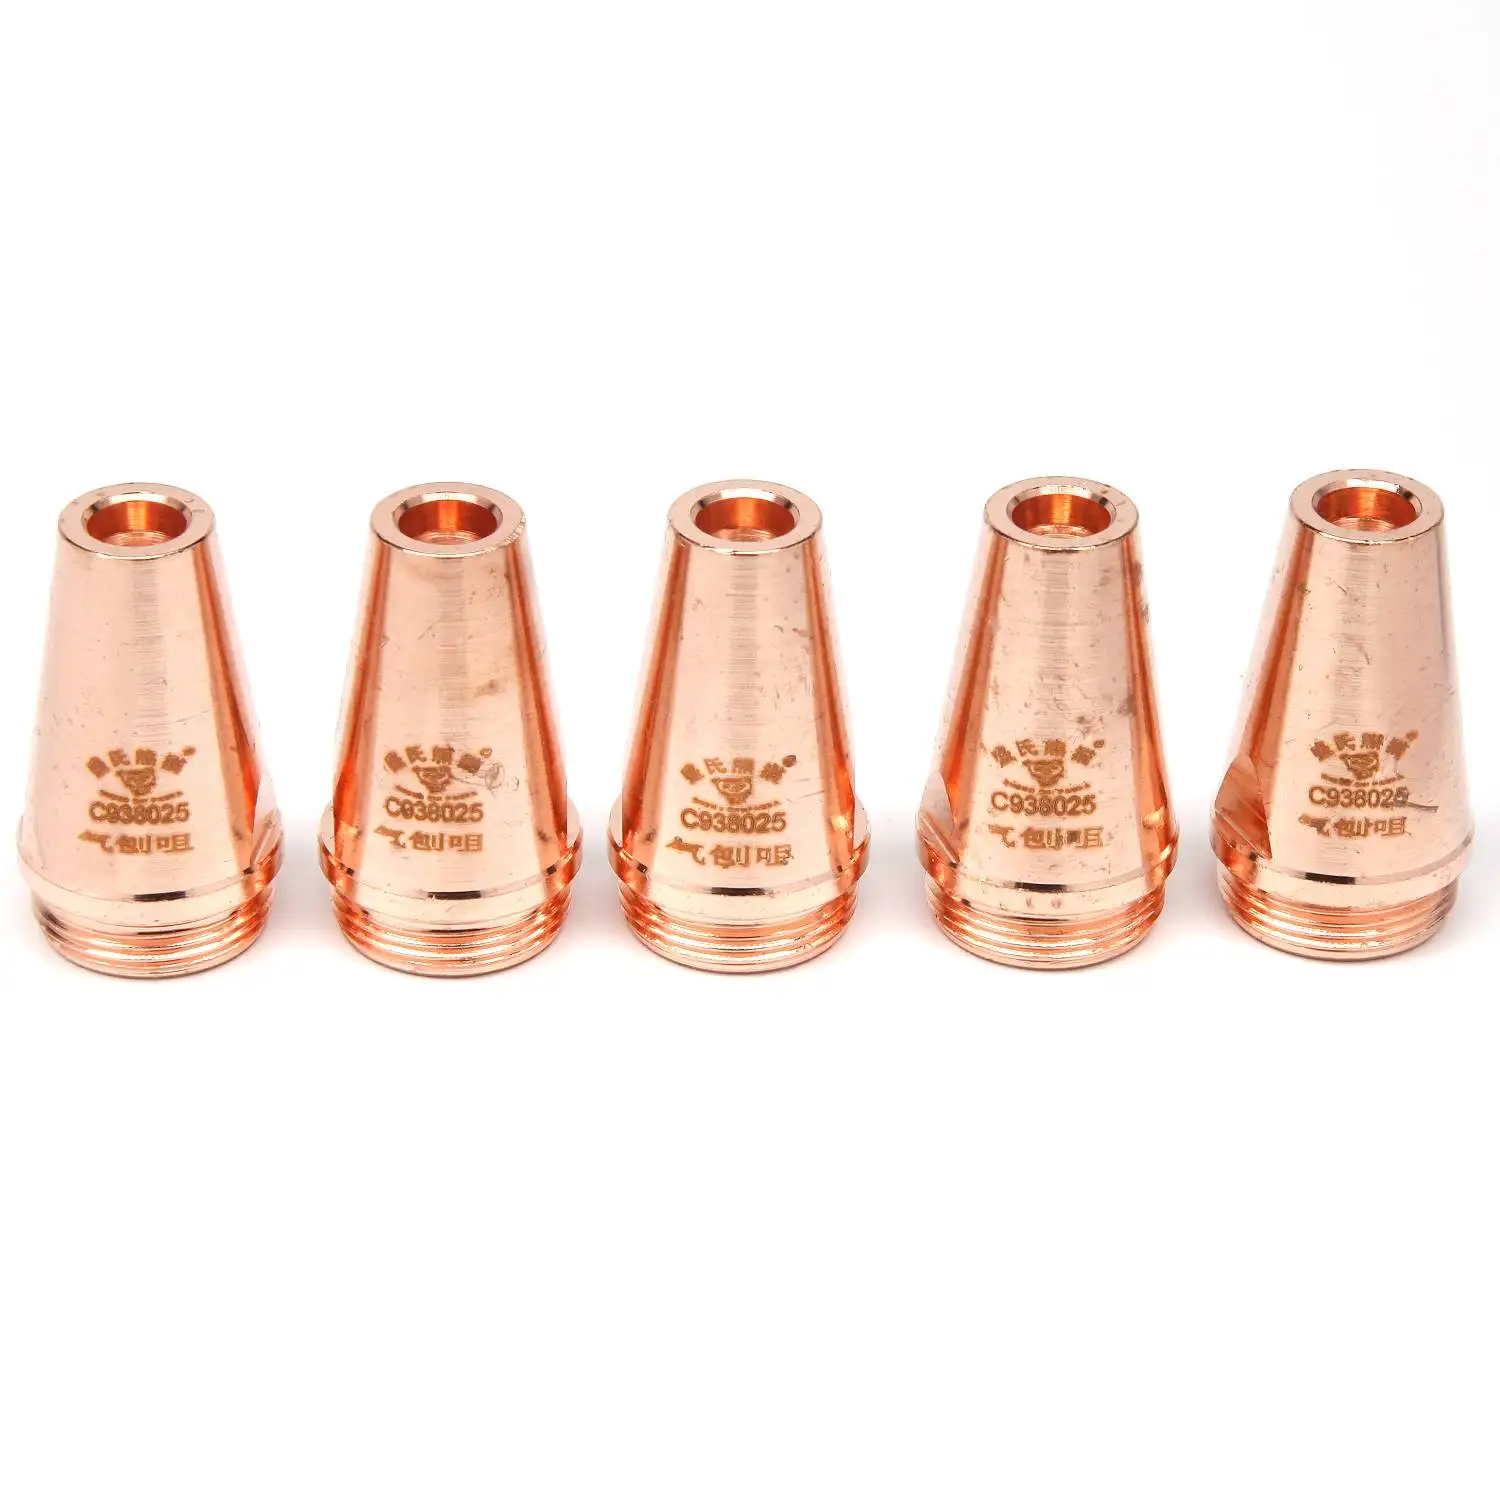 P80 P-80 Air Gouging Nozzle Engroove Tip Replace Carbon Rod Plasma Cutting Torch Consumables 5 Pieces